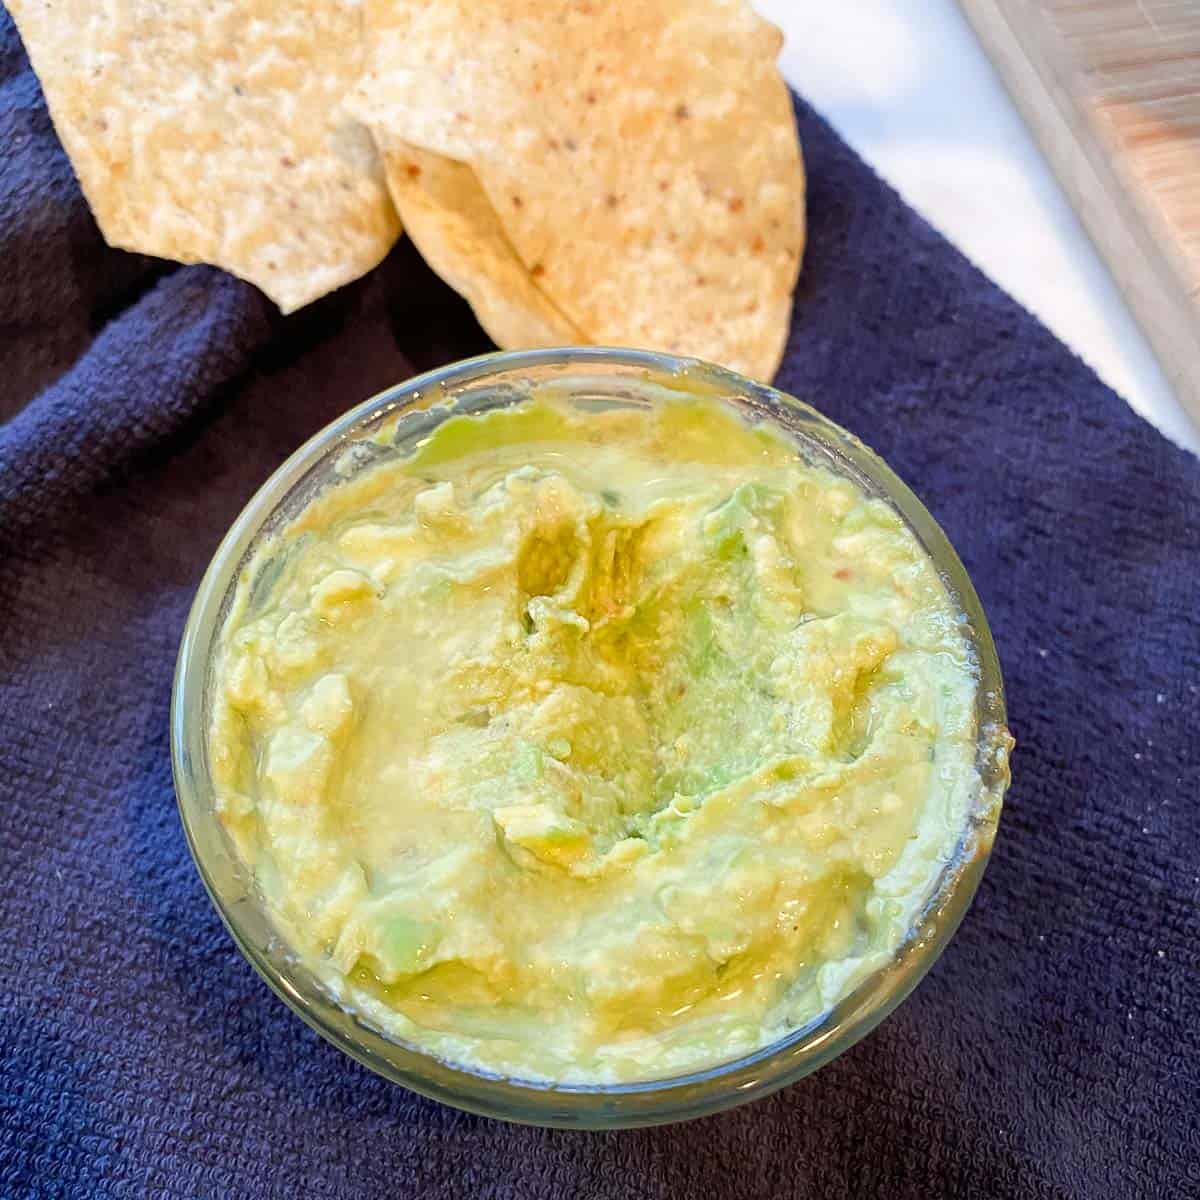 Image of a small bowl of fresh, green, perfectly preserved guacamole using our Make Ahead Secret for Guacamole placed on blue towel with chips on side. Delish!